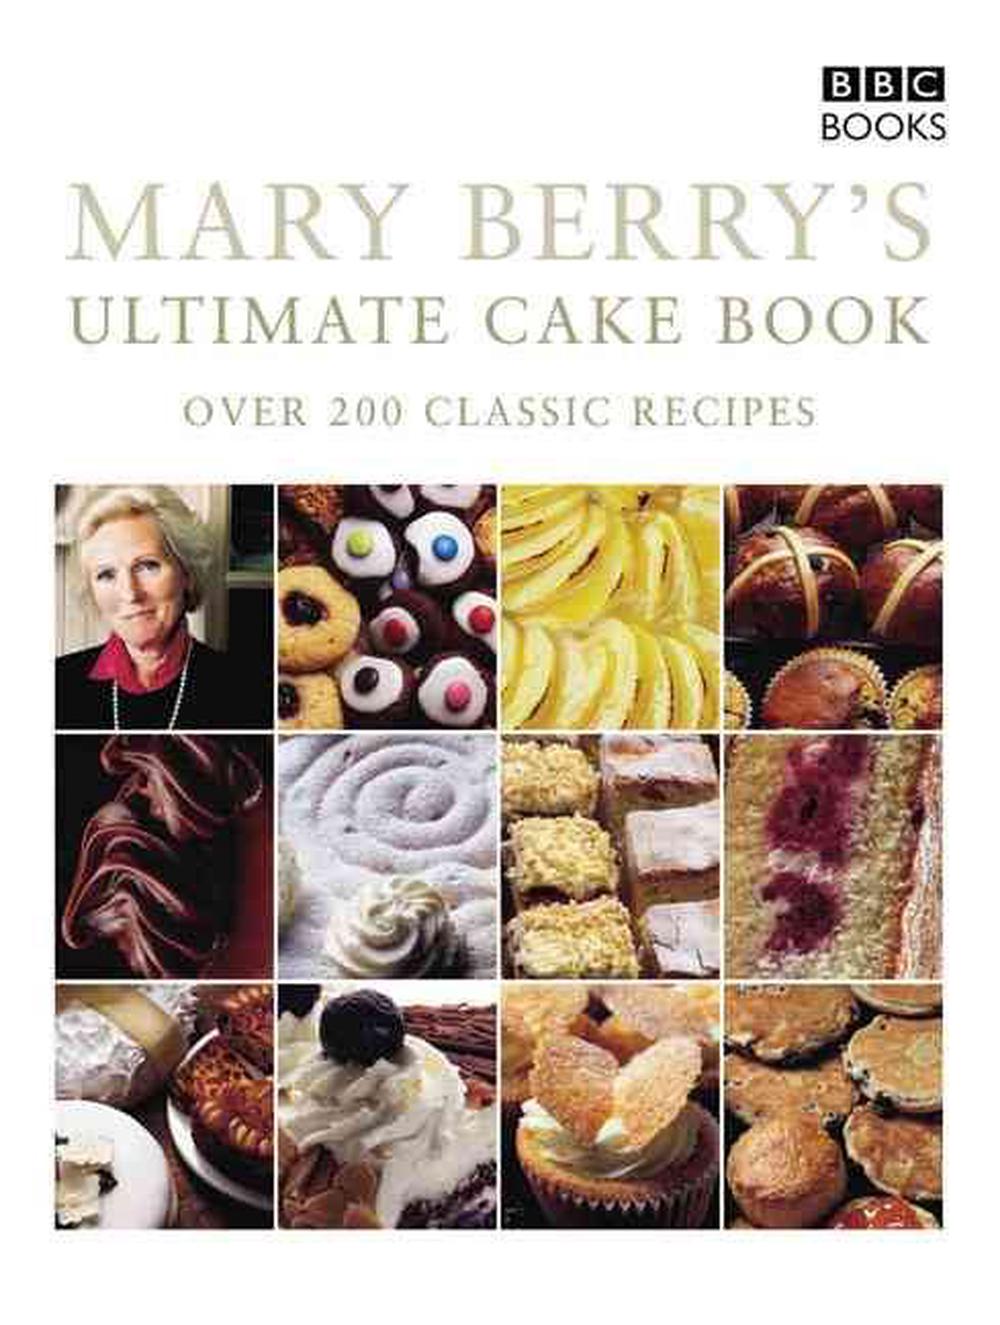 Mary Berry's Ultimate Cake Book (Second Edition) by Mary Berry ...